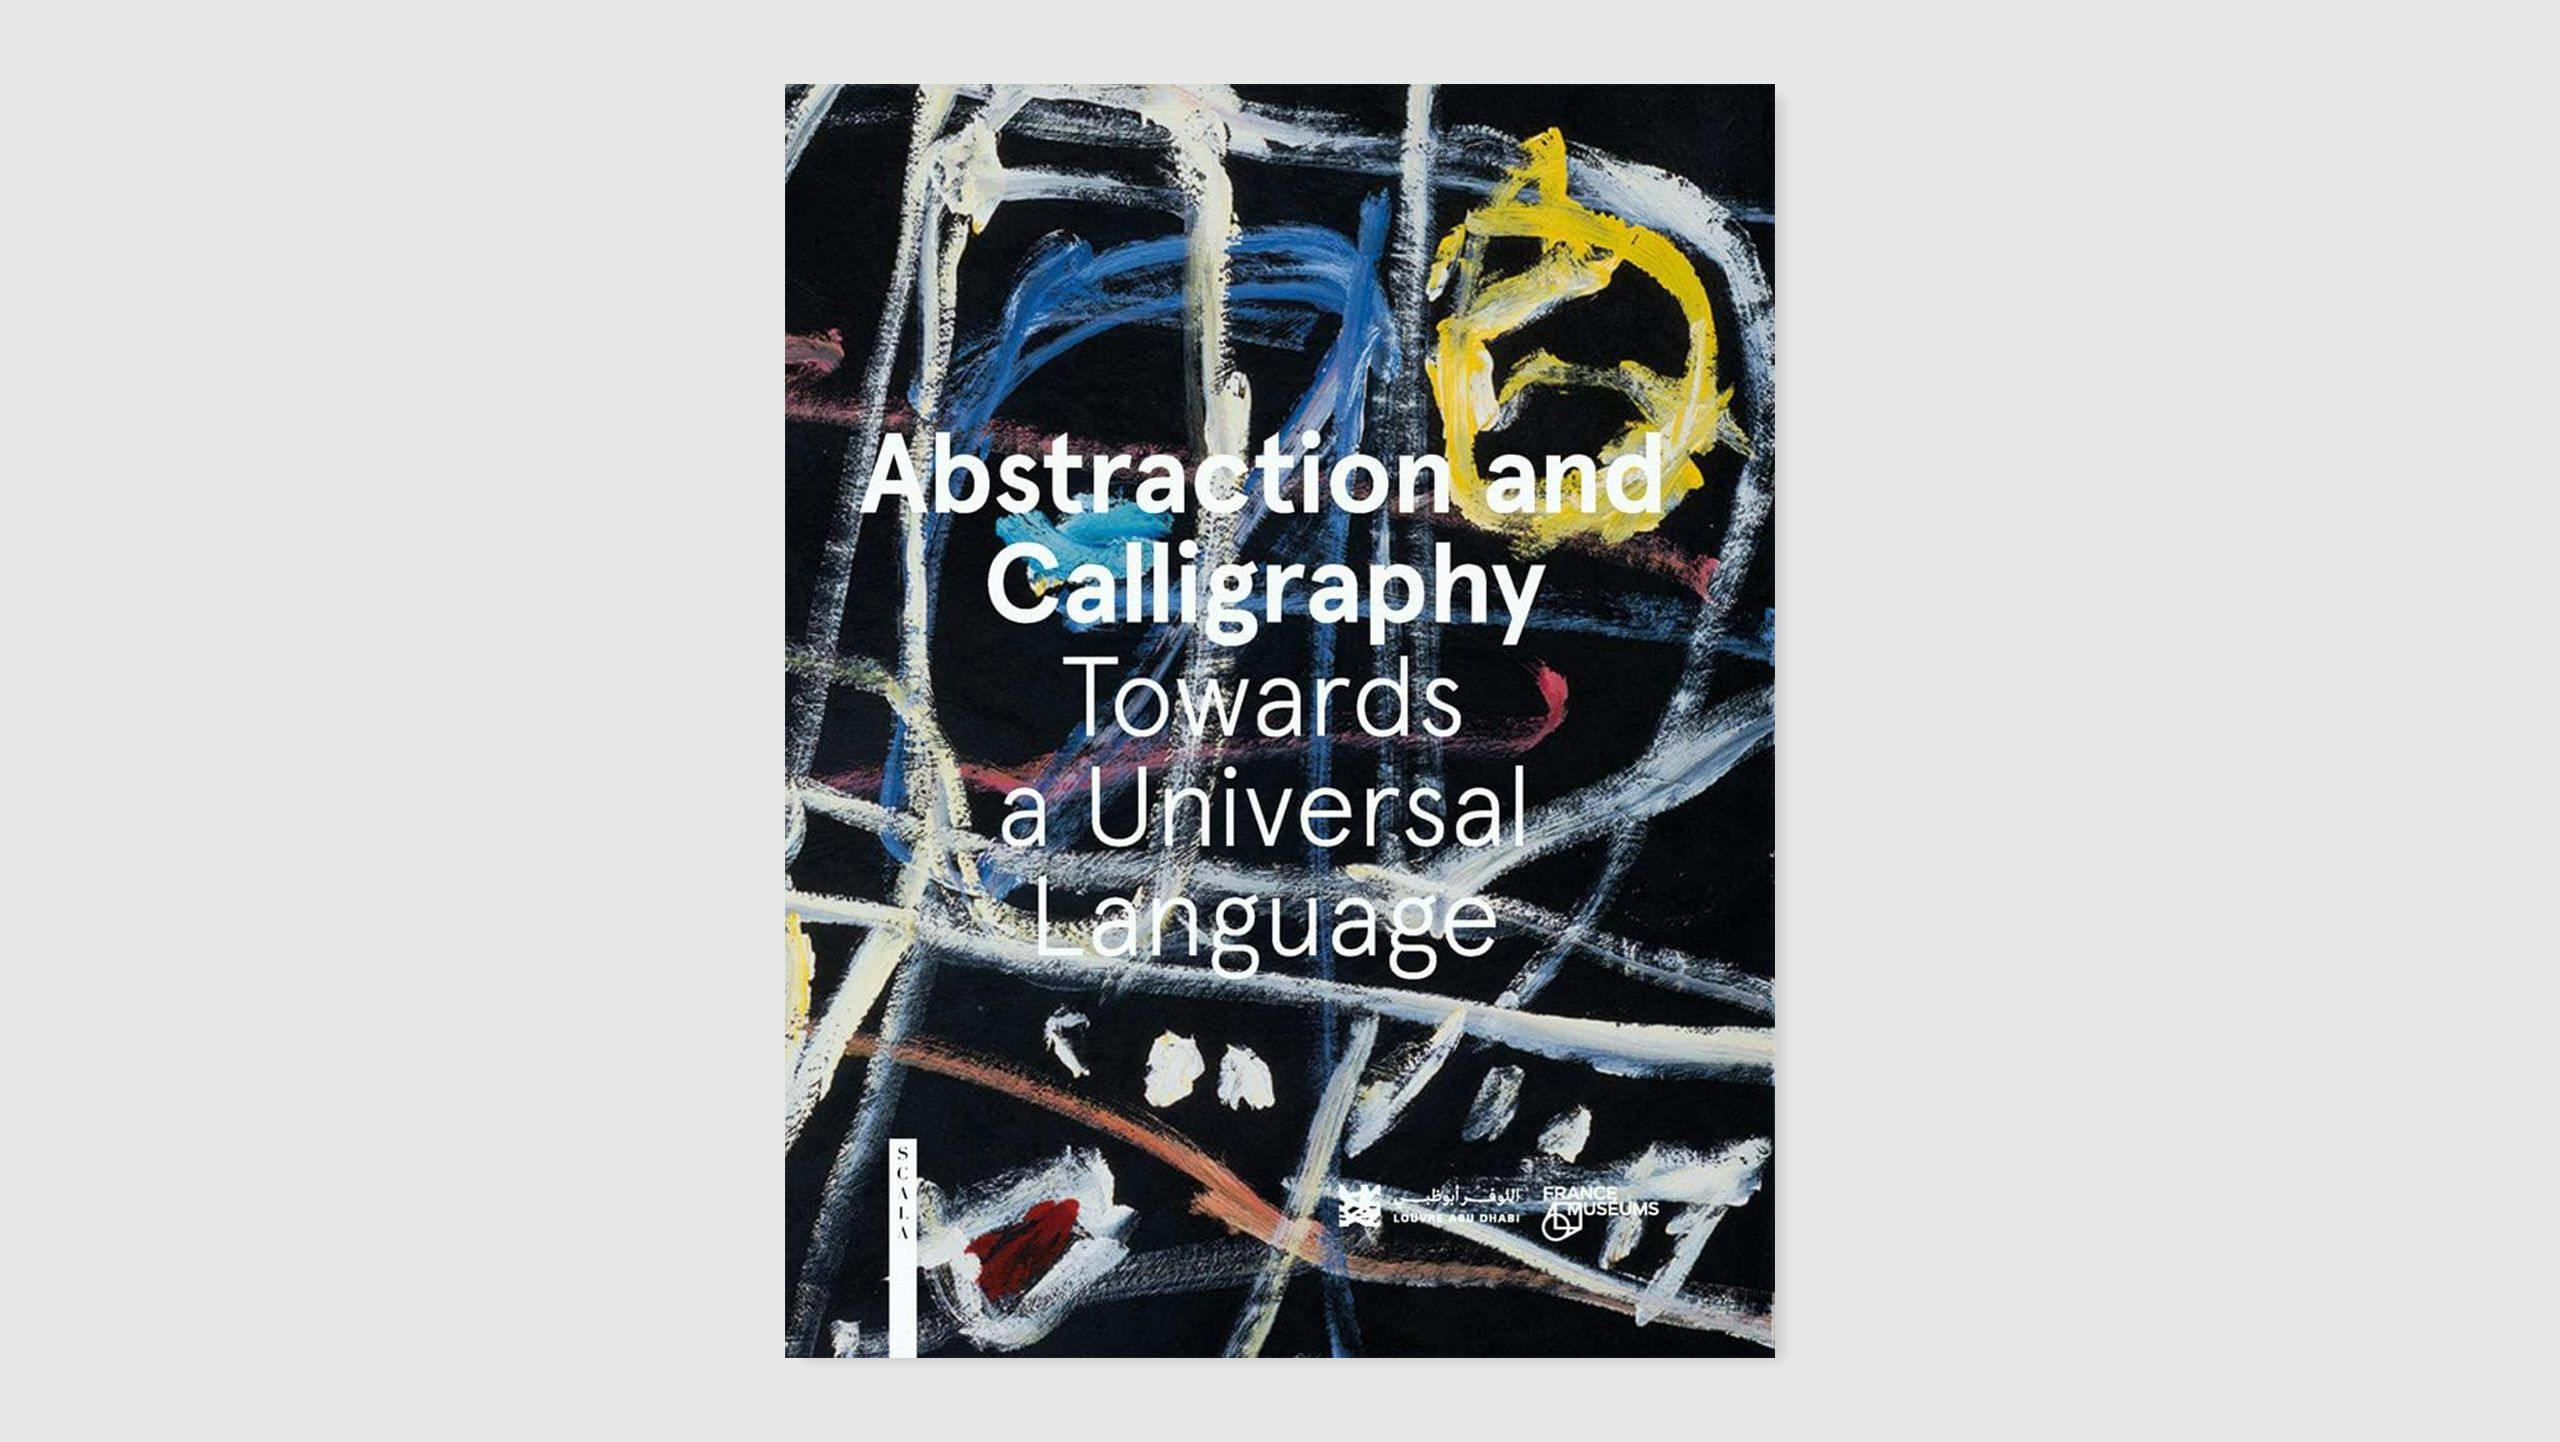 Cover of a book titled Abstraction and Calligraphy: Towards a Universal Language, published by Scala Arts Publishers in 2021.